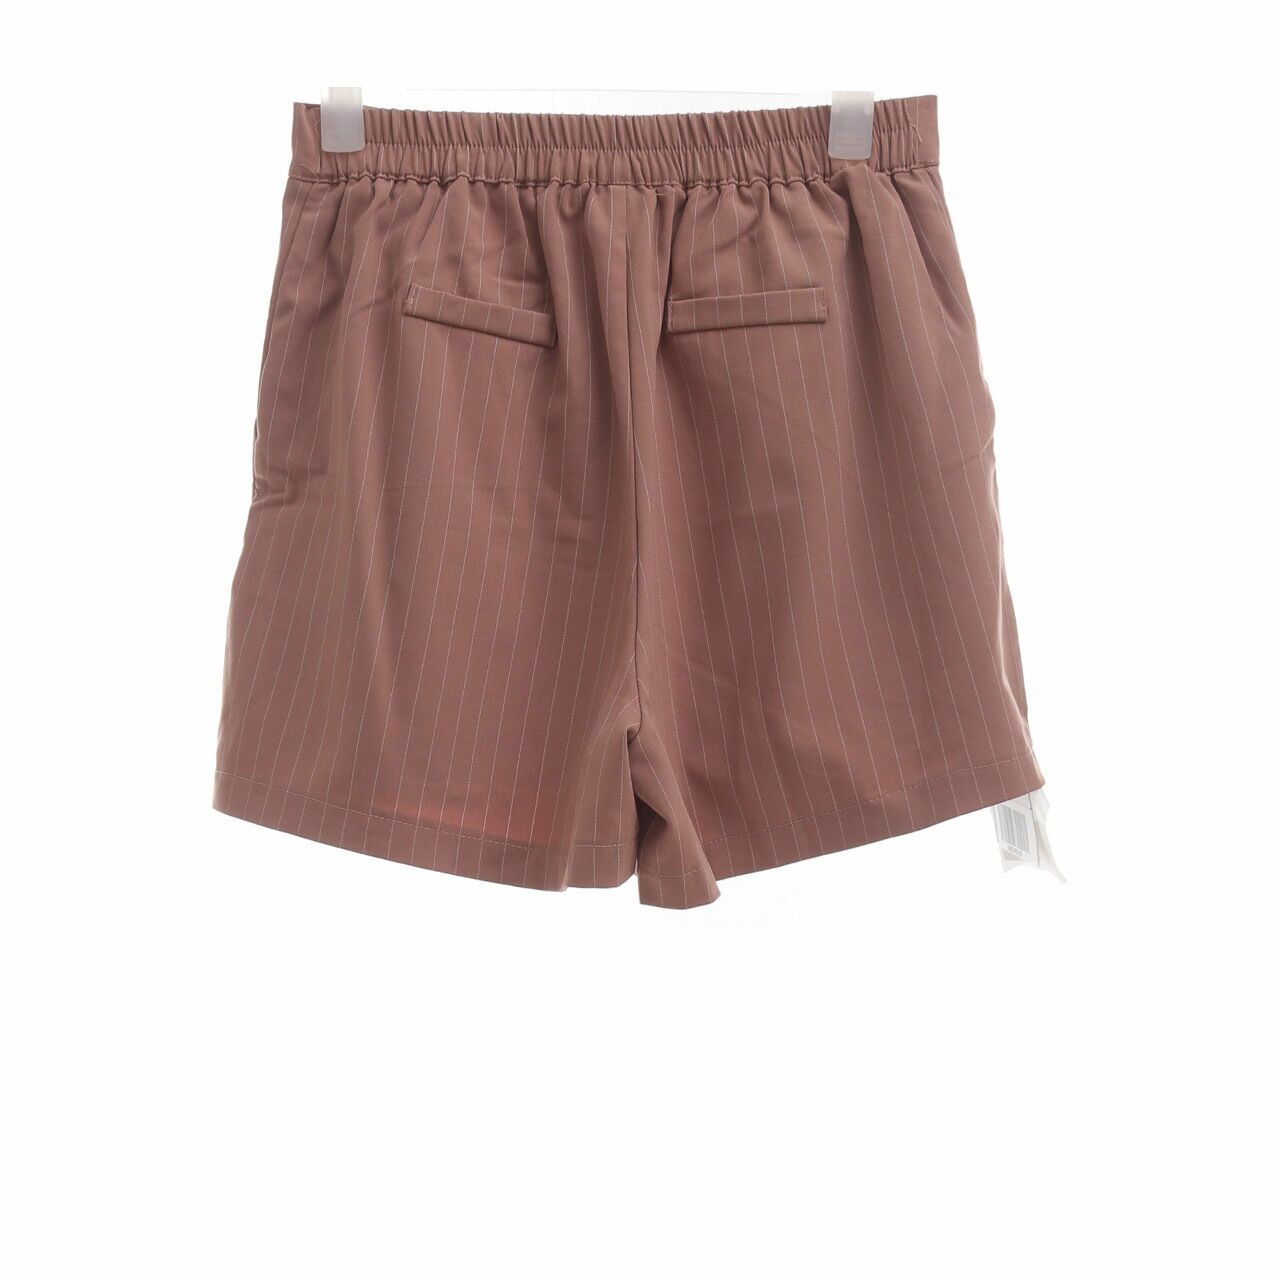 This is April Dusty Pink Striped Short Pants